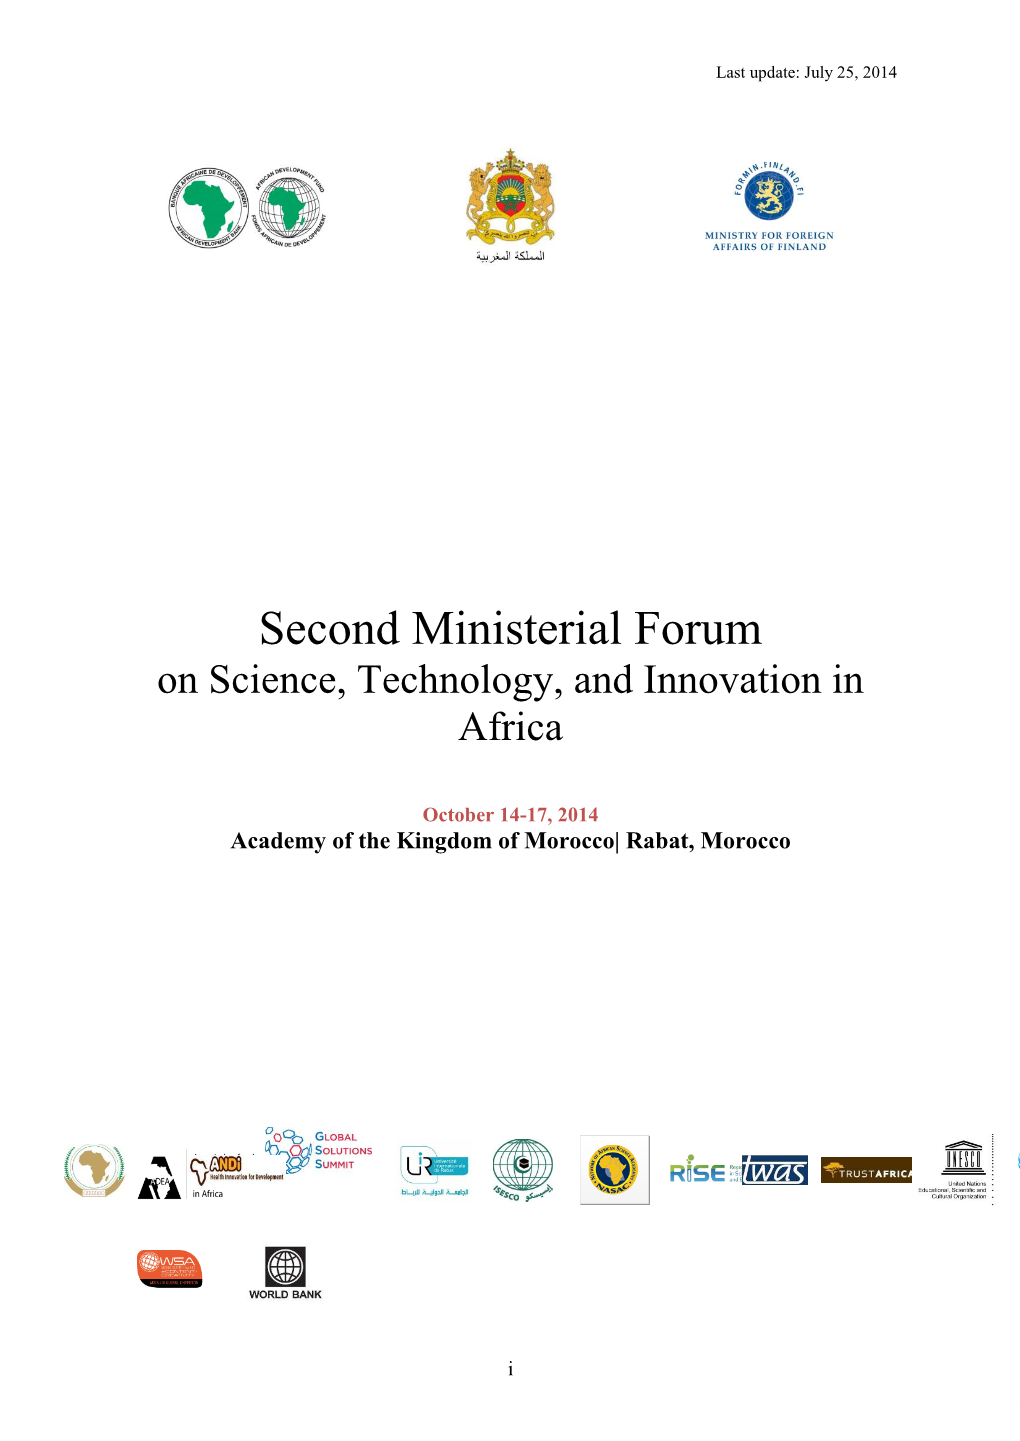 Second Ministerial Forum on Science, Technology, and Innovation in Africa